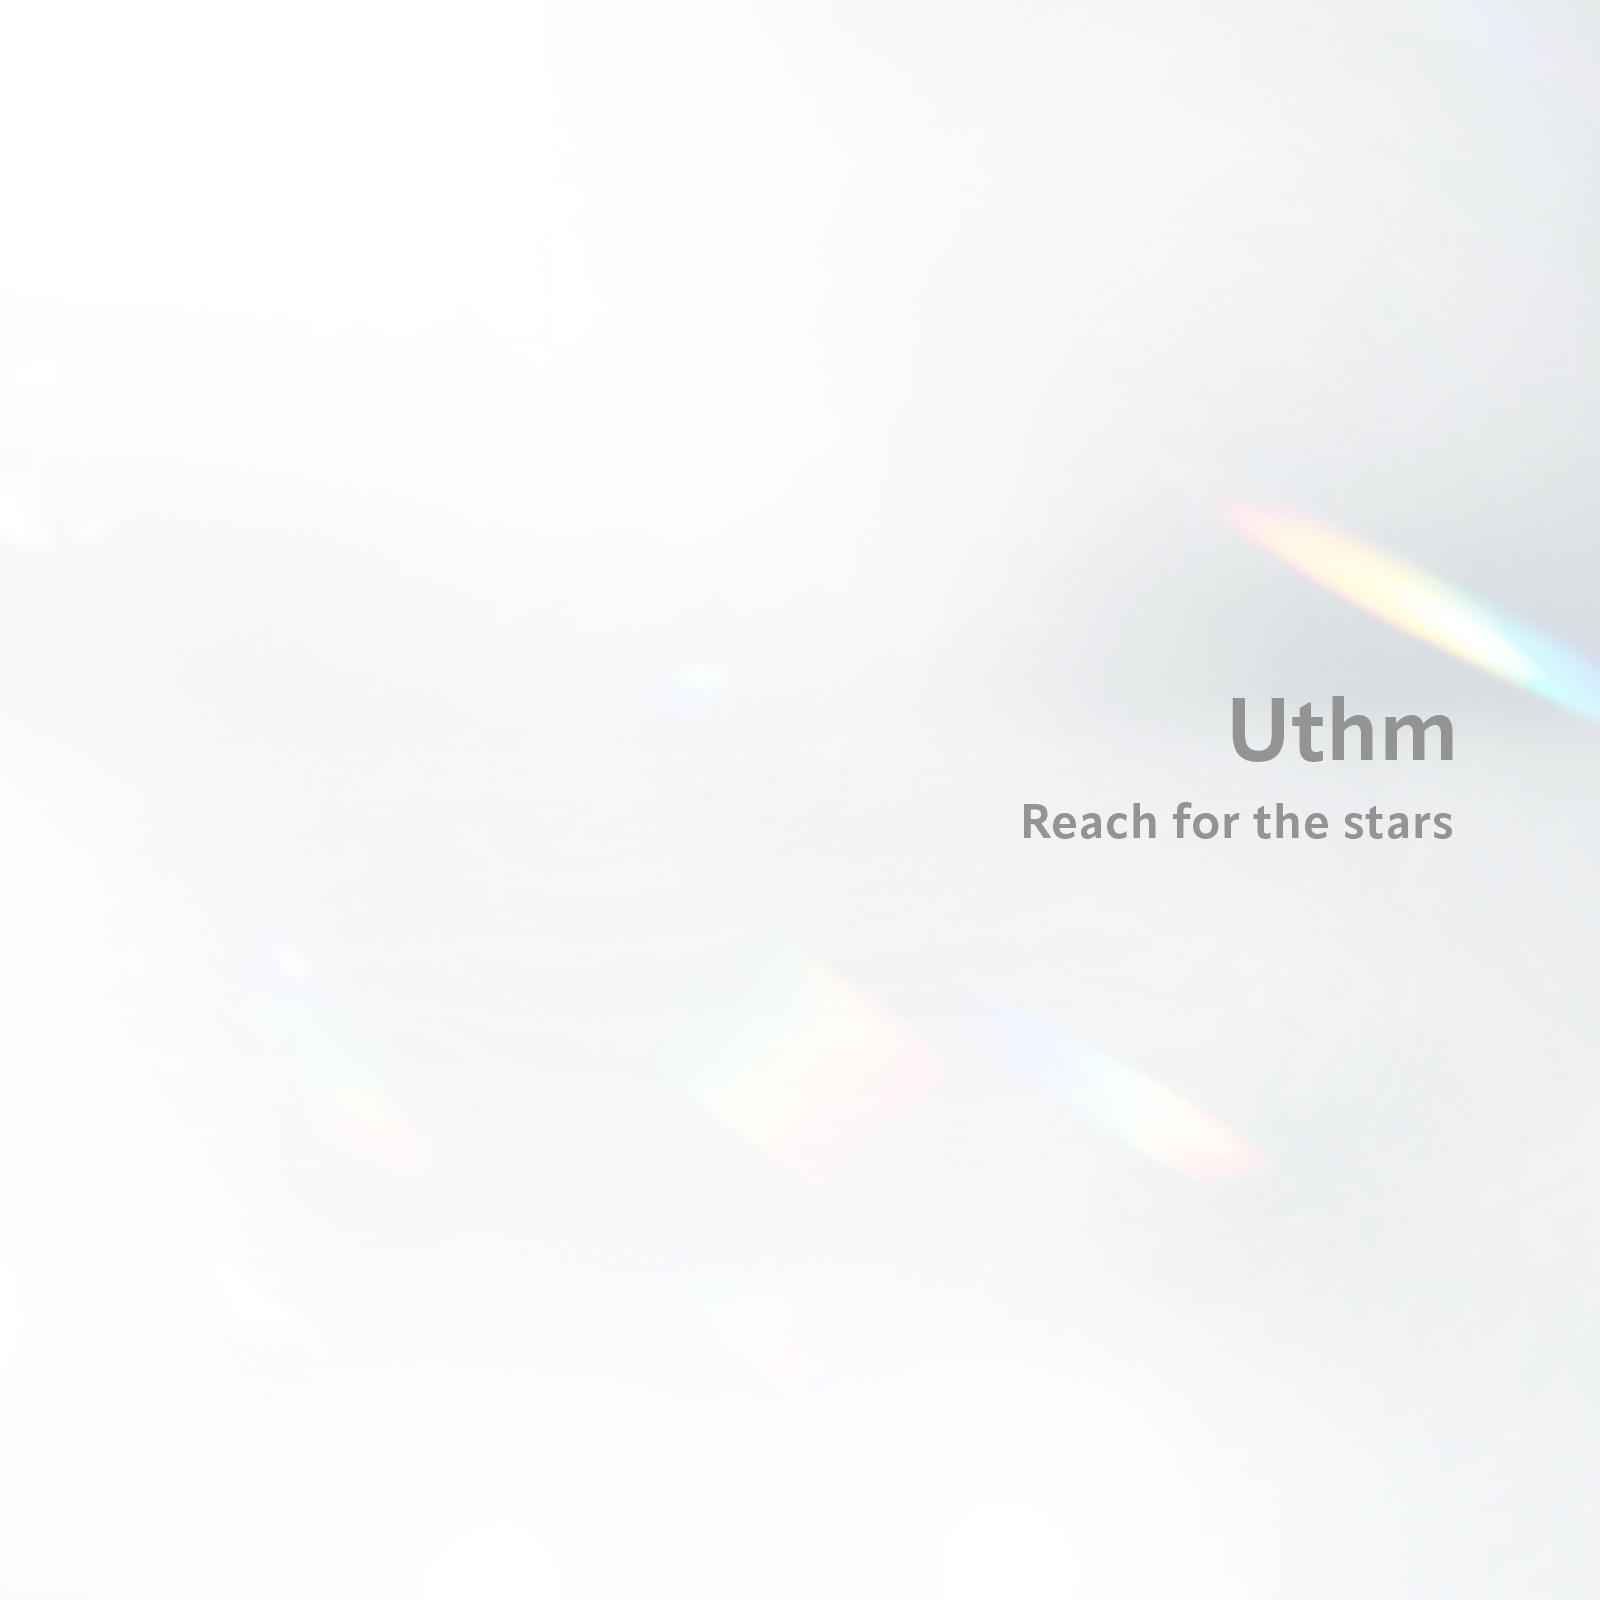 Uthm「Reach for the stars EP」好評配信中！& 12月15日(金) ライブゲスト出演のお知らせ